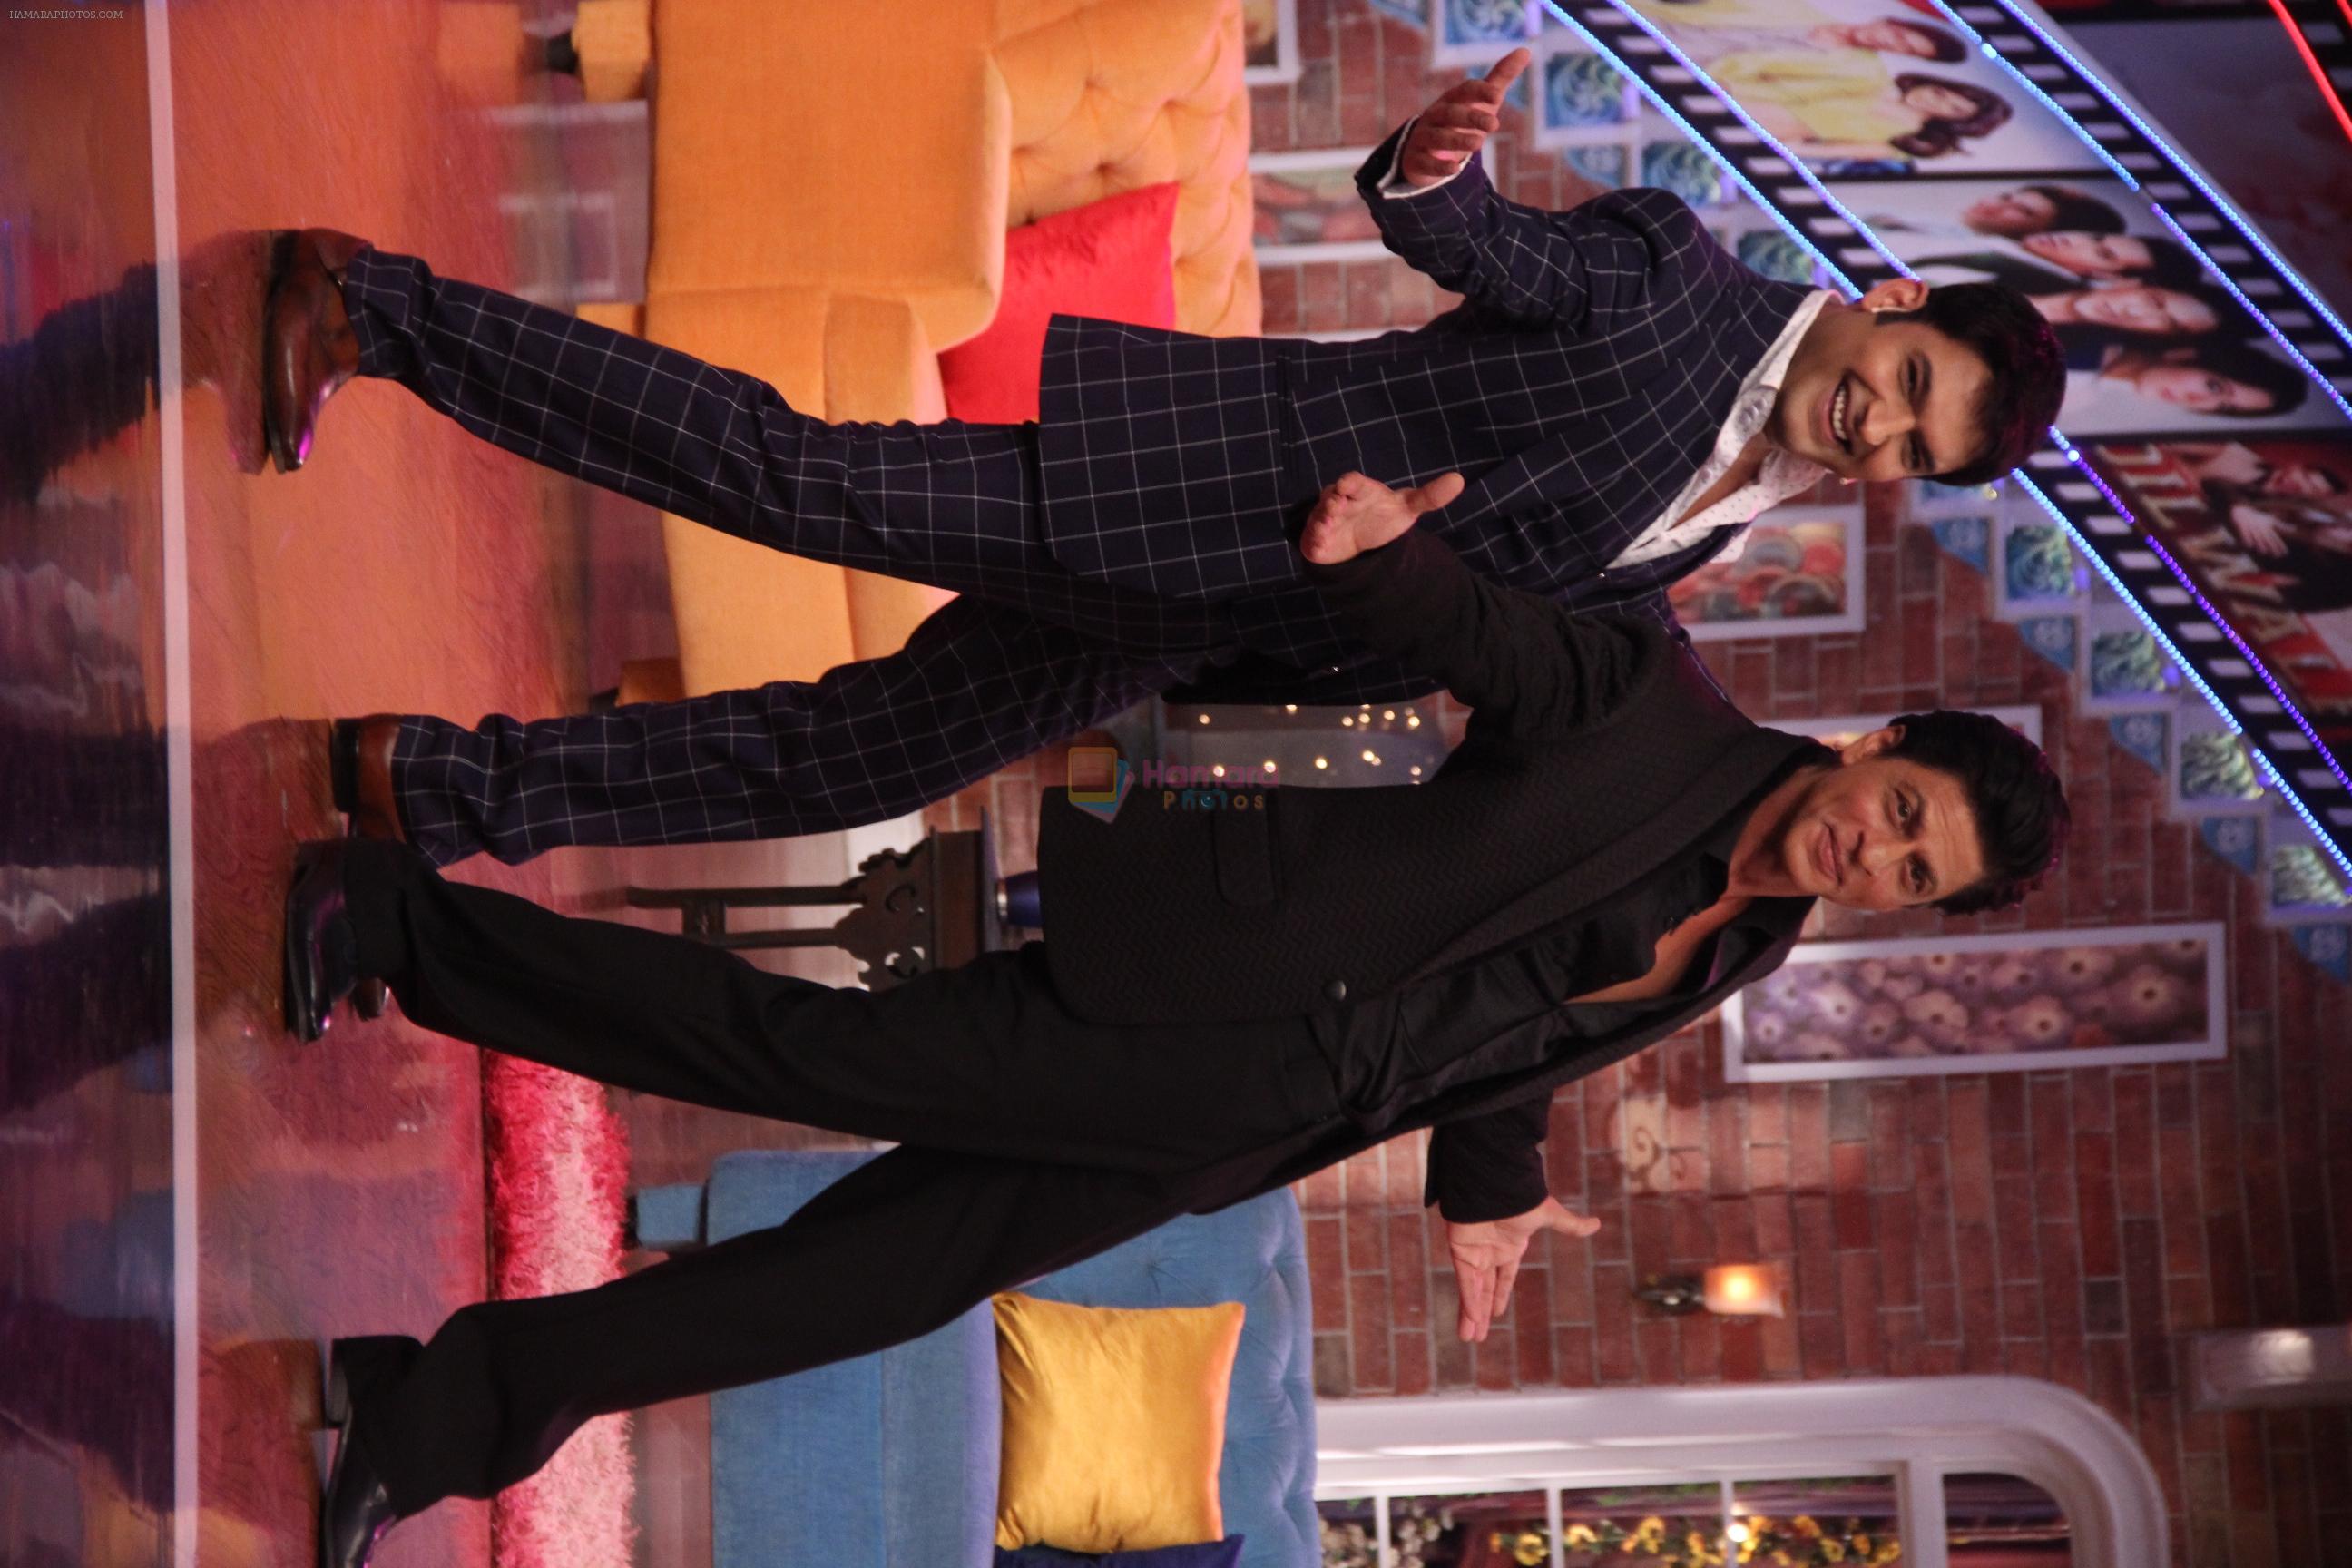 Shahrukh KHan with Team Dilwale on the sets of Comedy Nights With Kapil on 10th Dec 2015